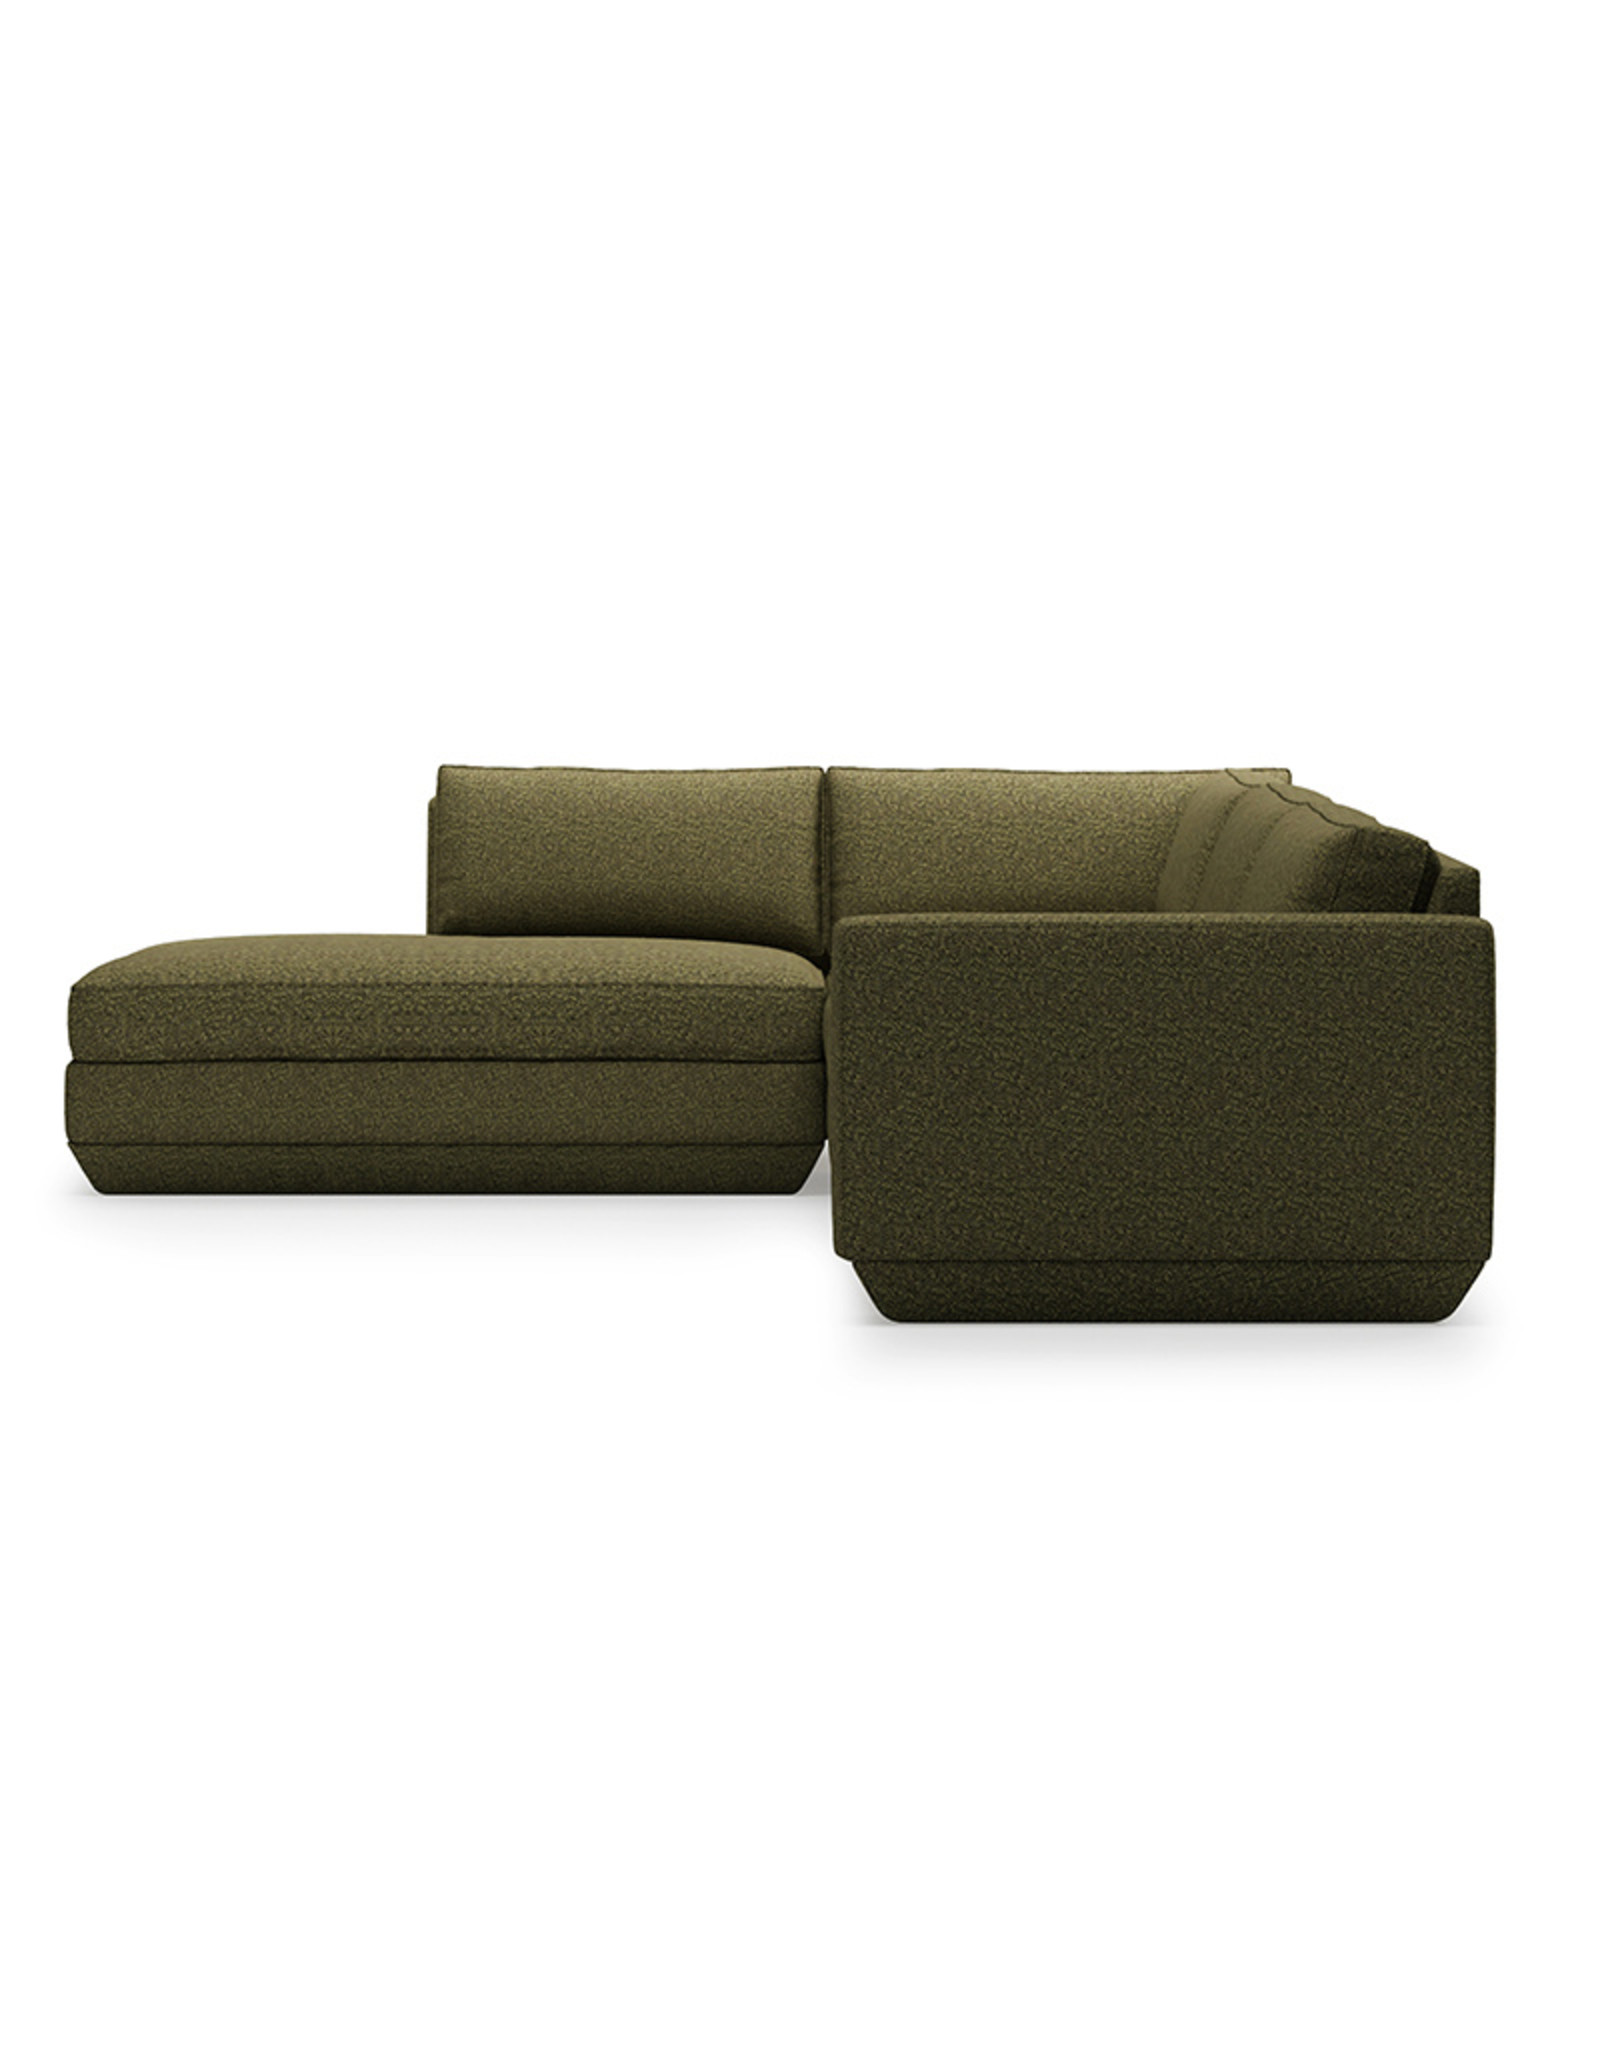 Gus* Modern Podium 4-PC Lounge Sectional A, Left-facing